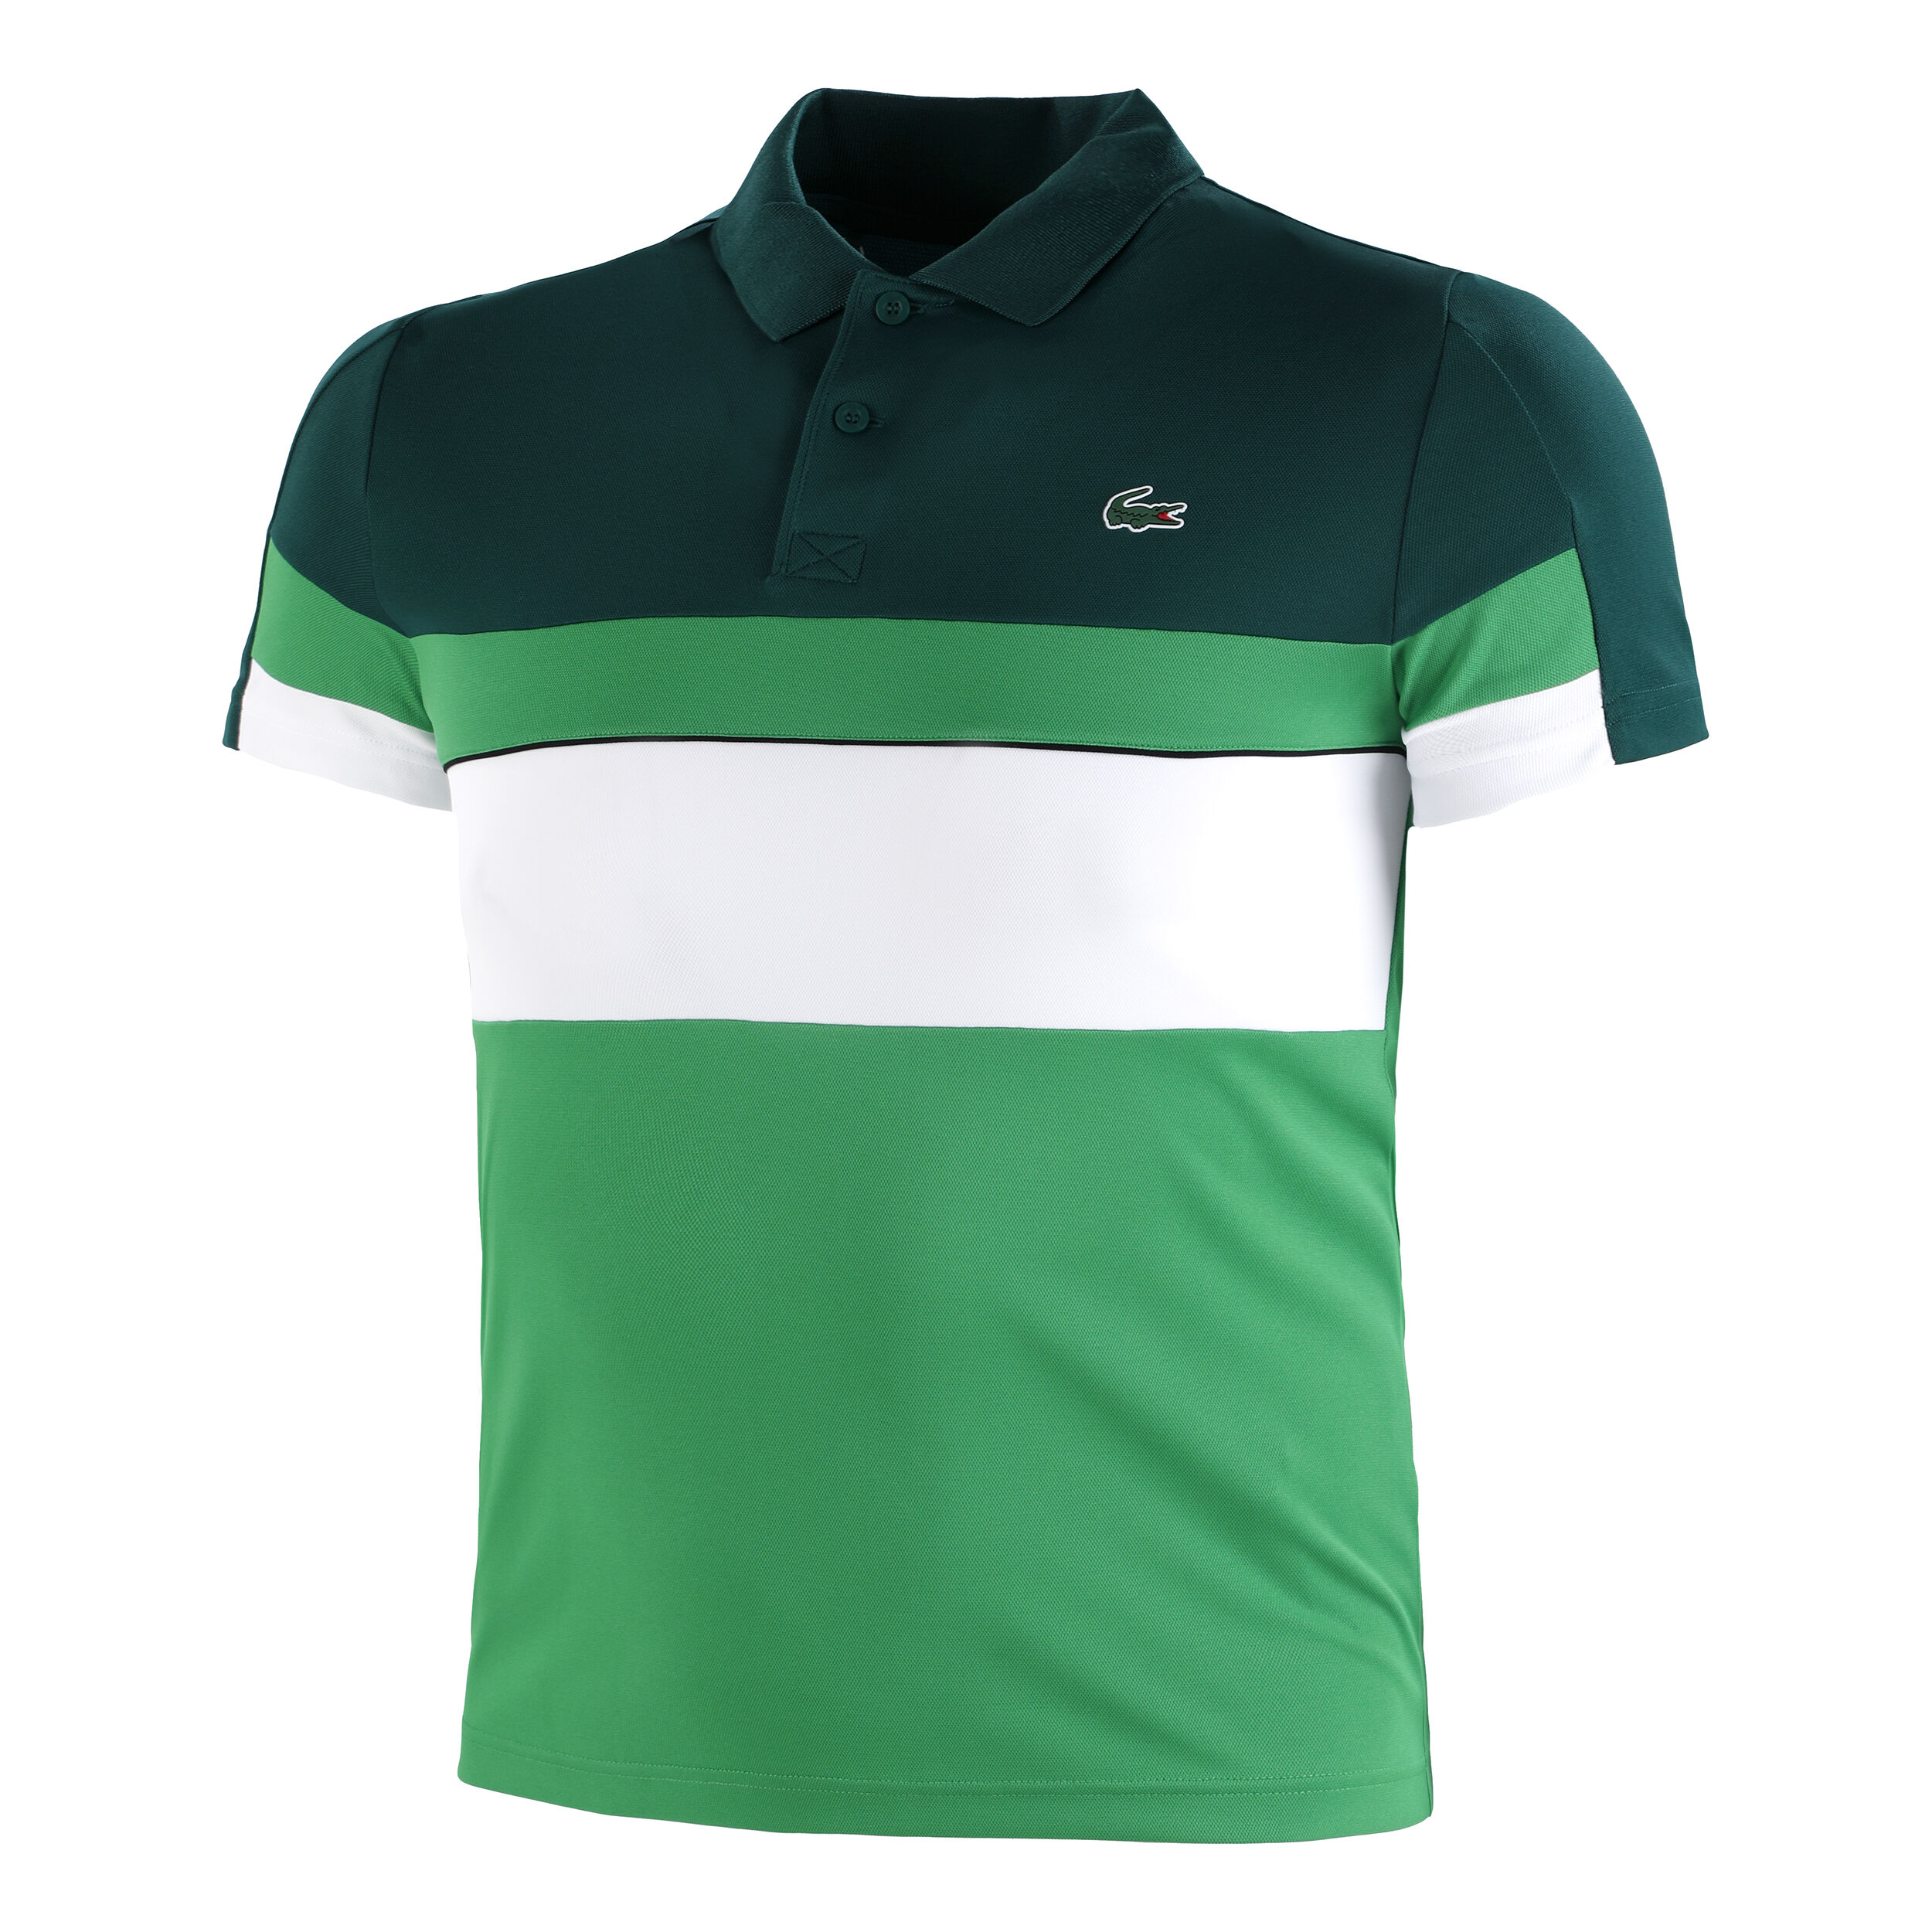 cheap lacoste clothing